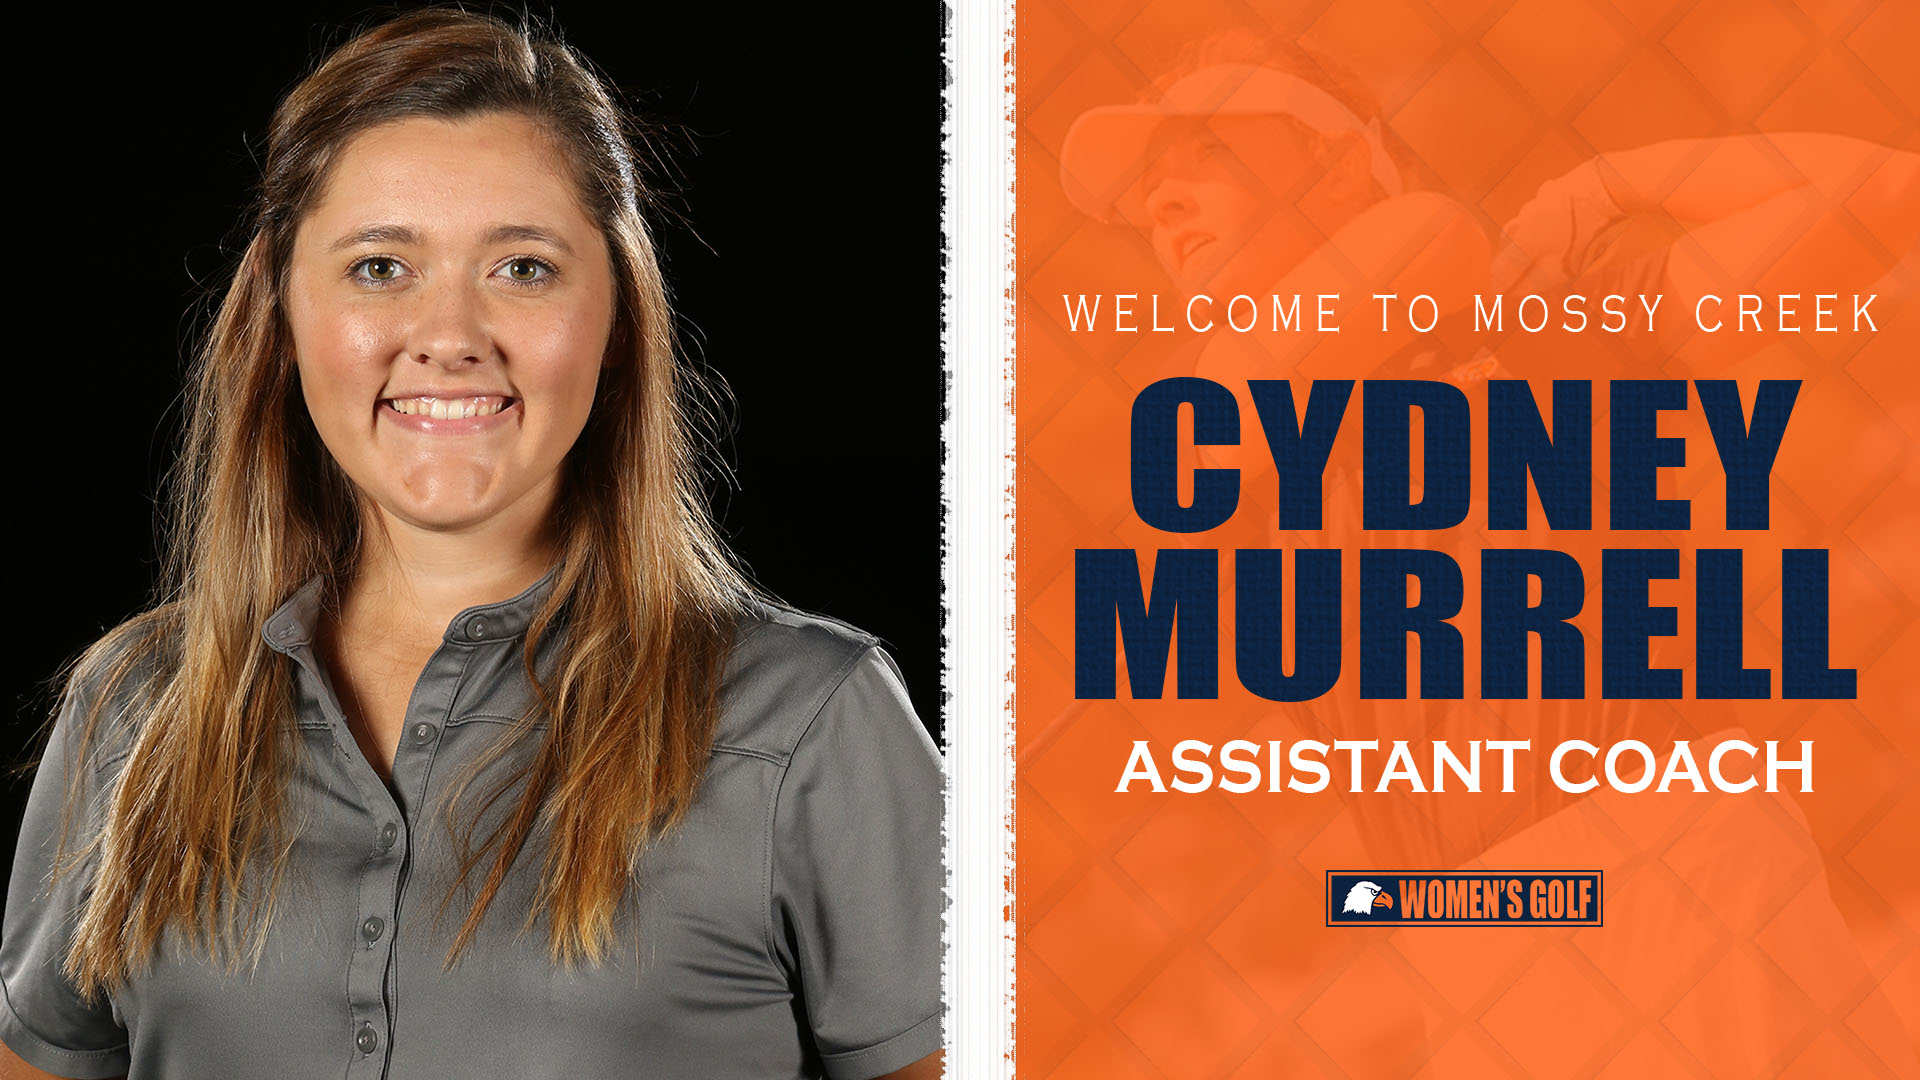 Murrell announced as assistant coach